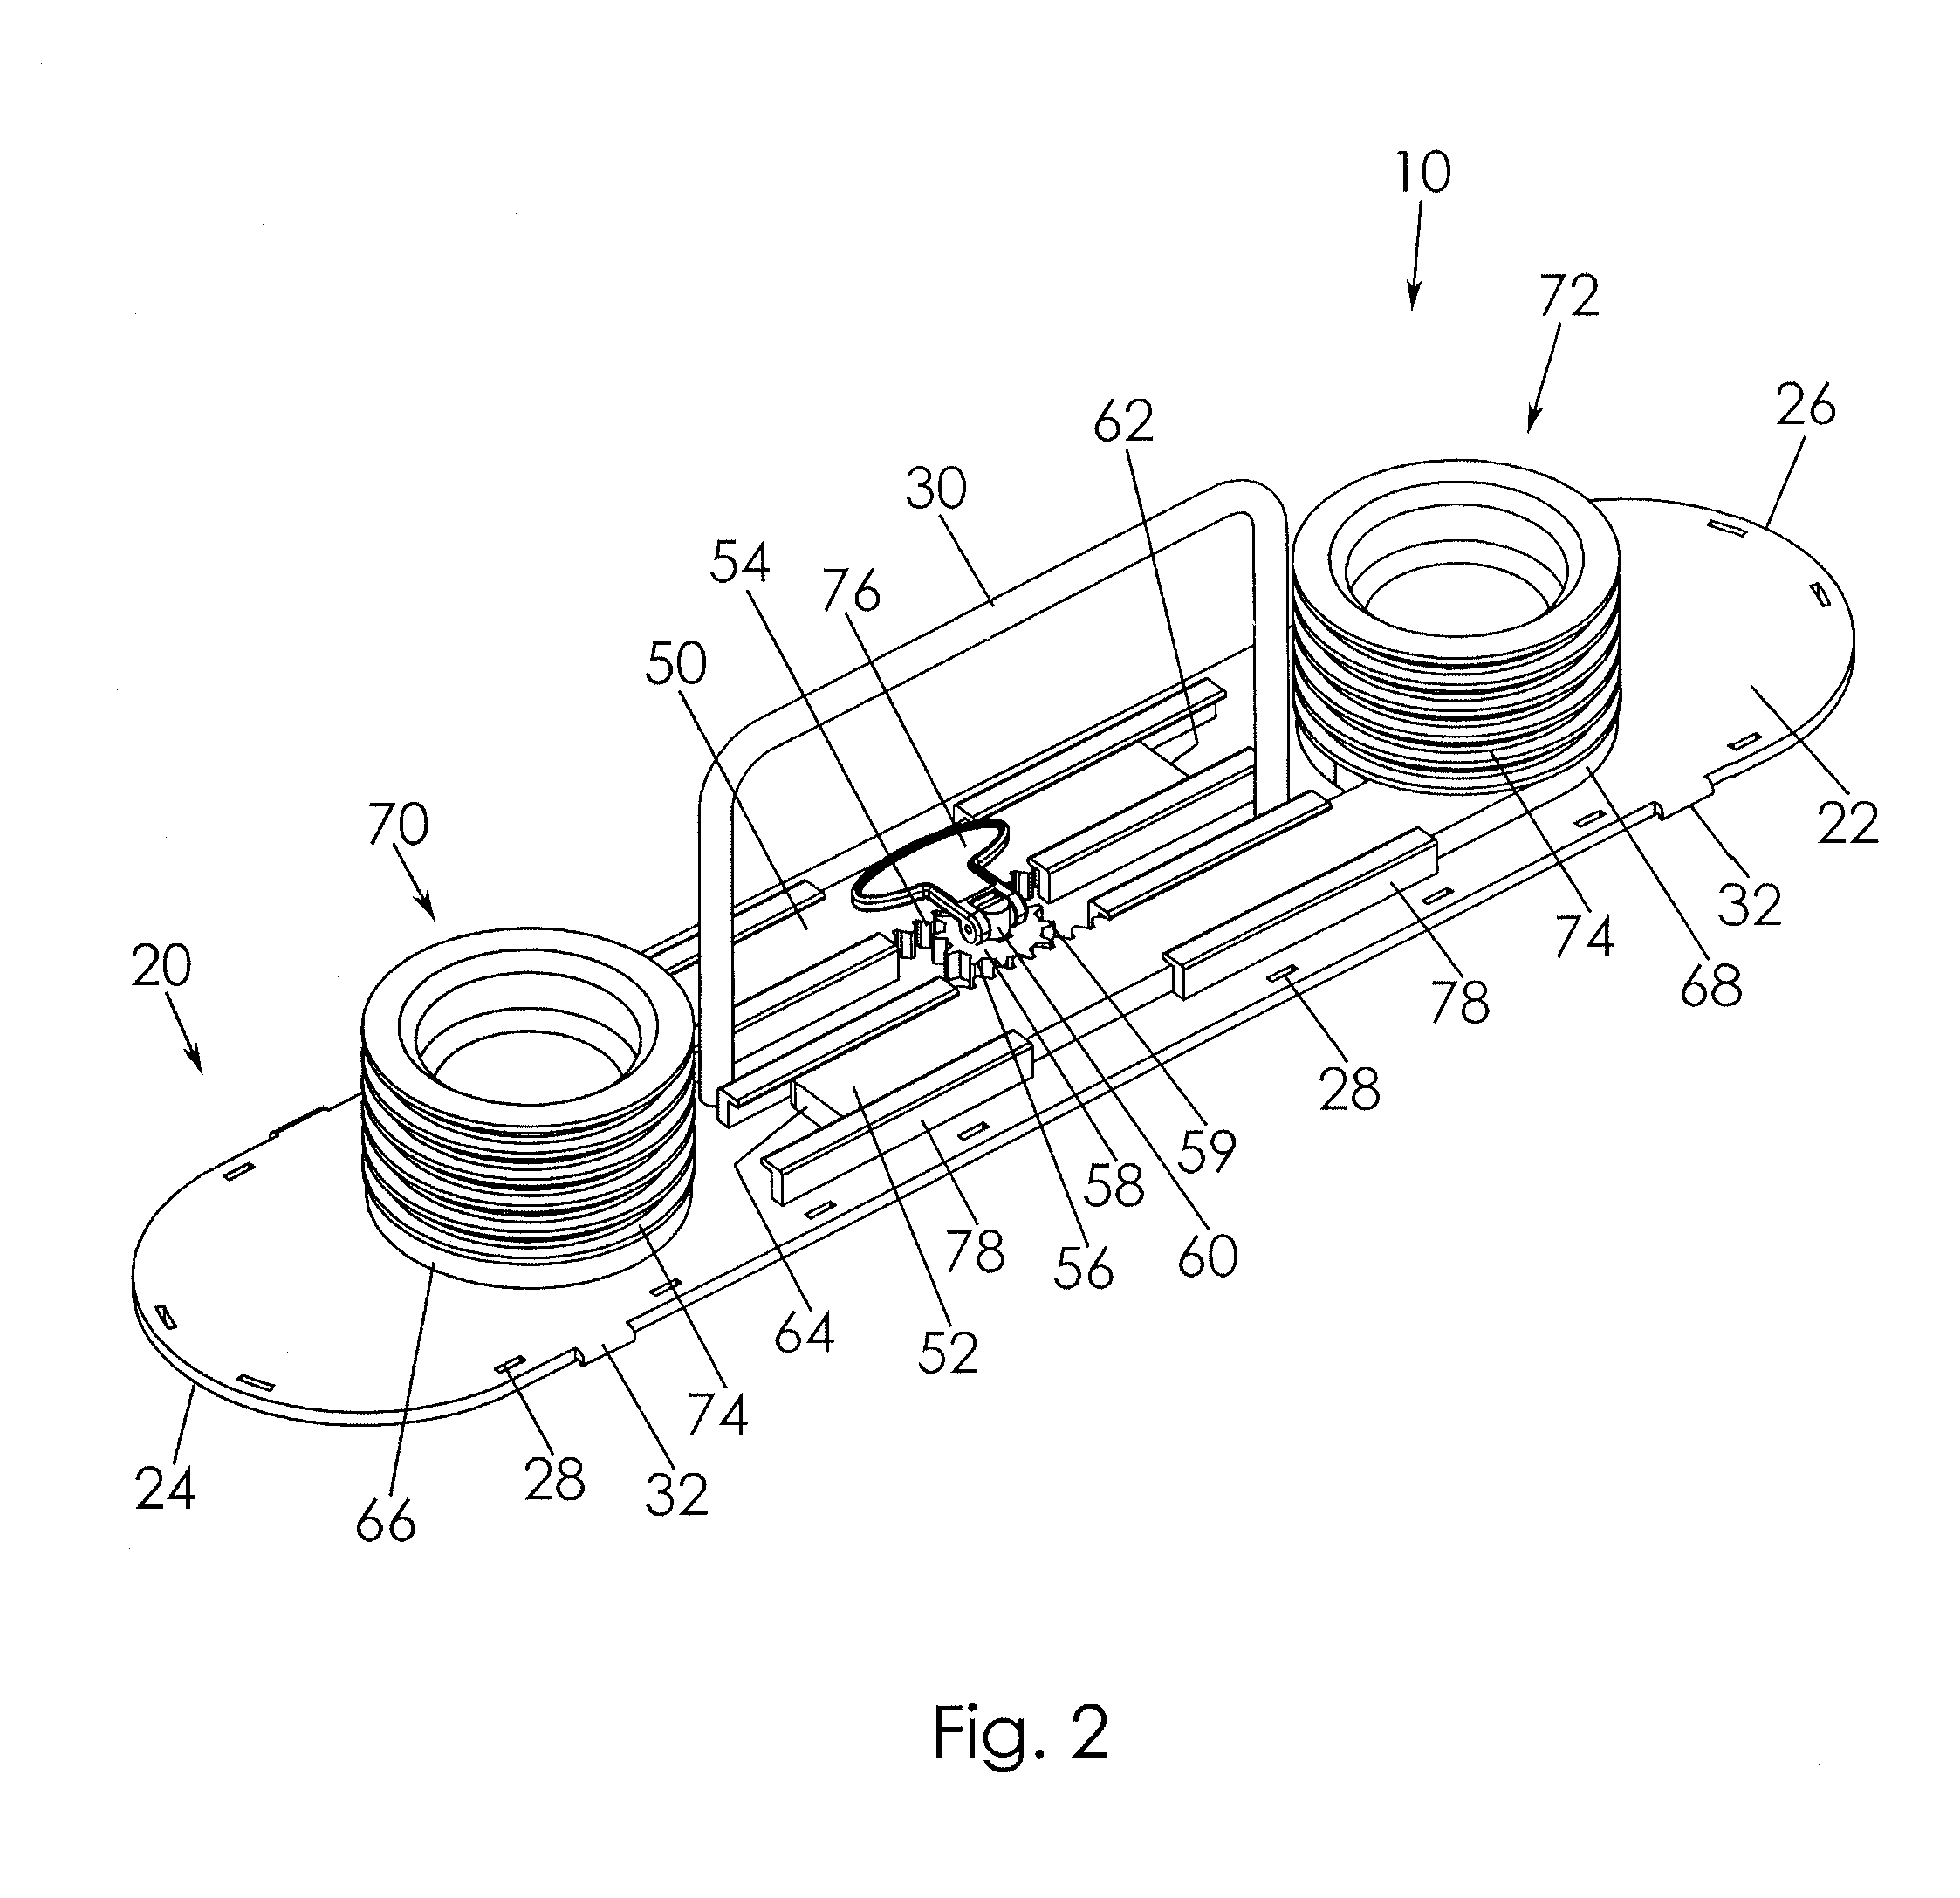 Length-adjustable chain carrying device